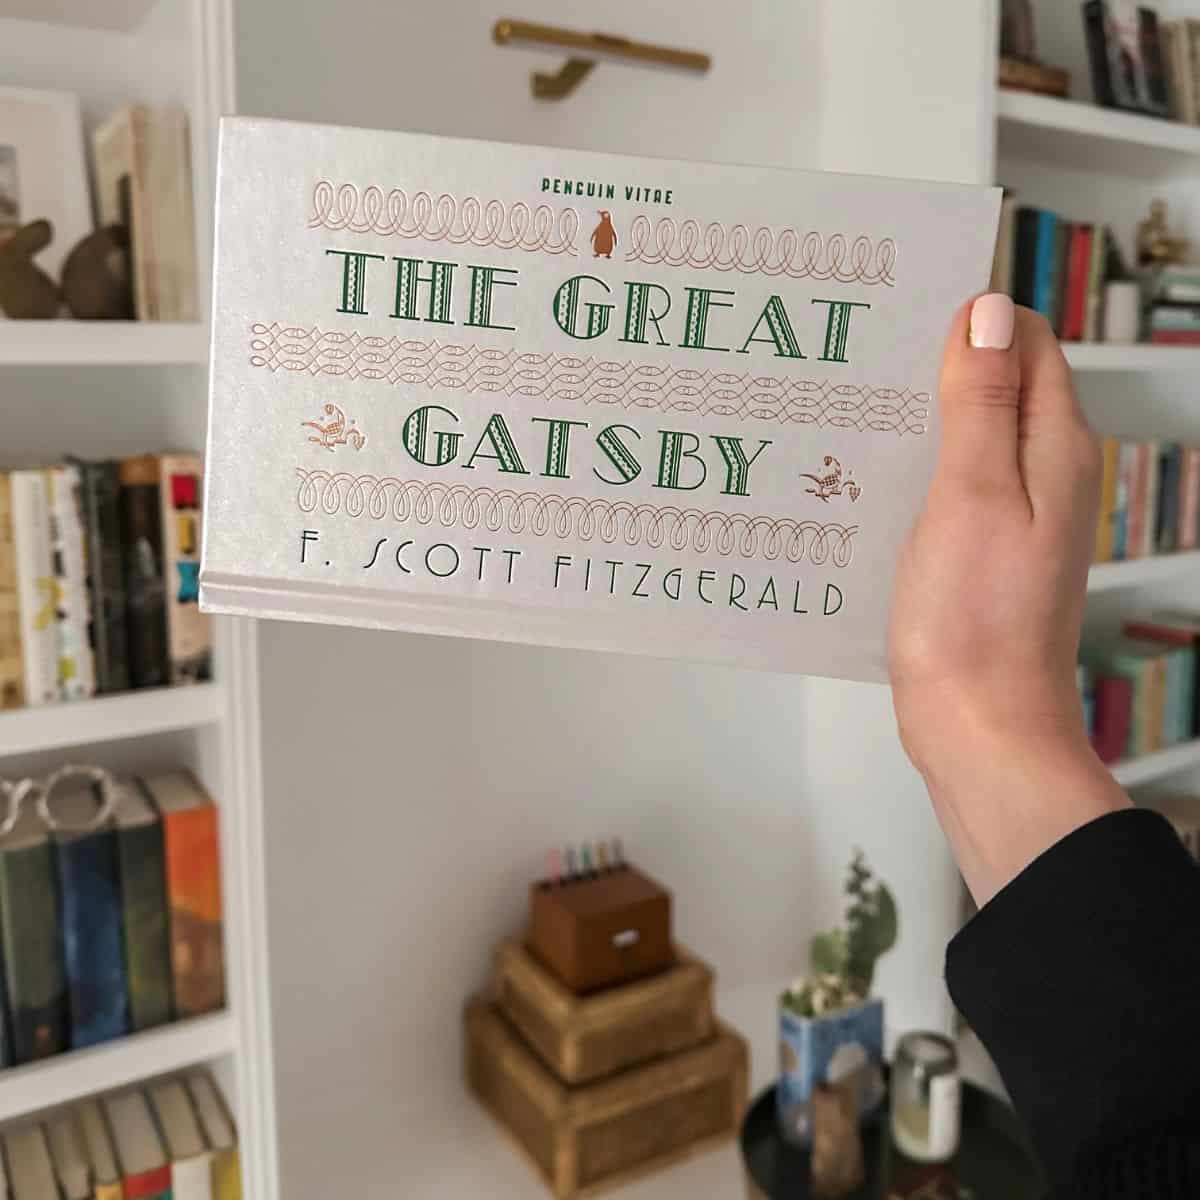 f. scott fitzgerald, the great gatsby held in front of bookshelves.